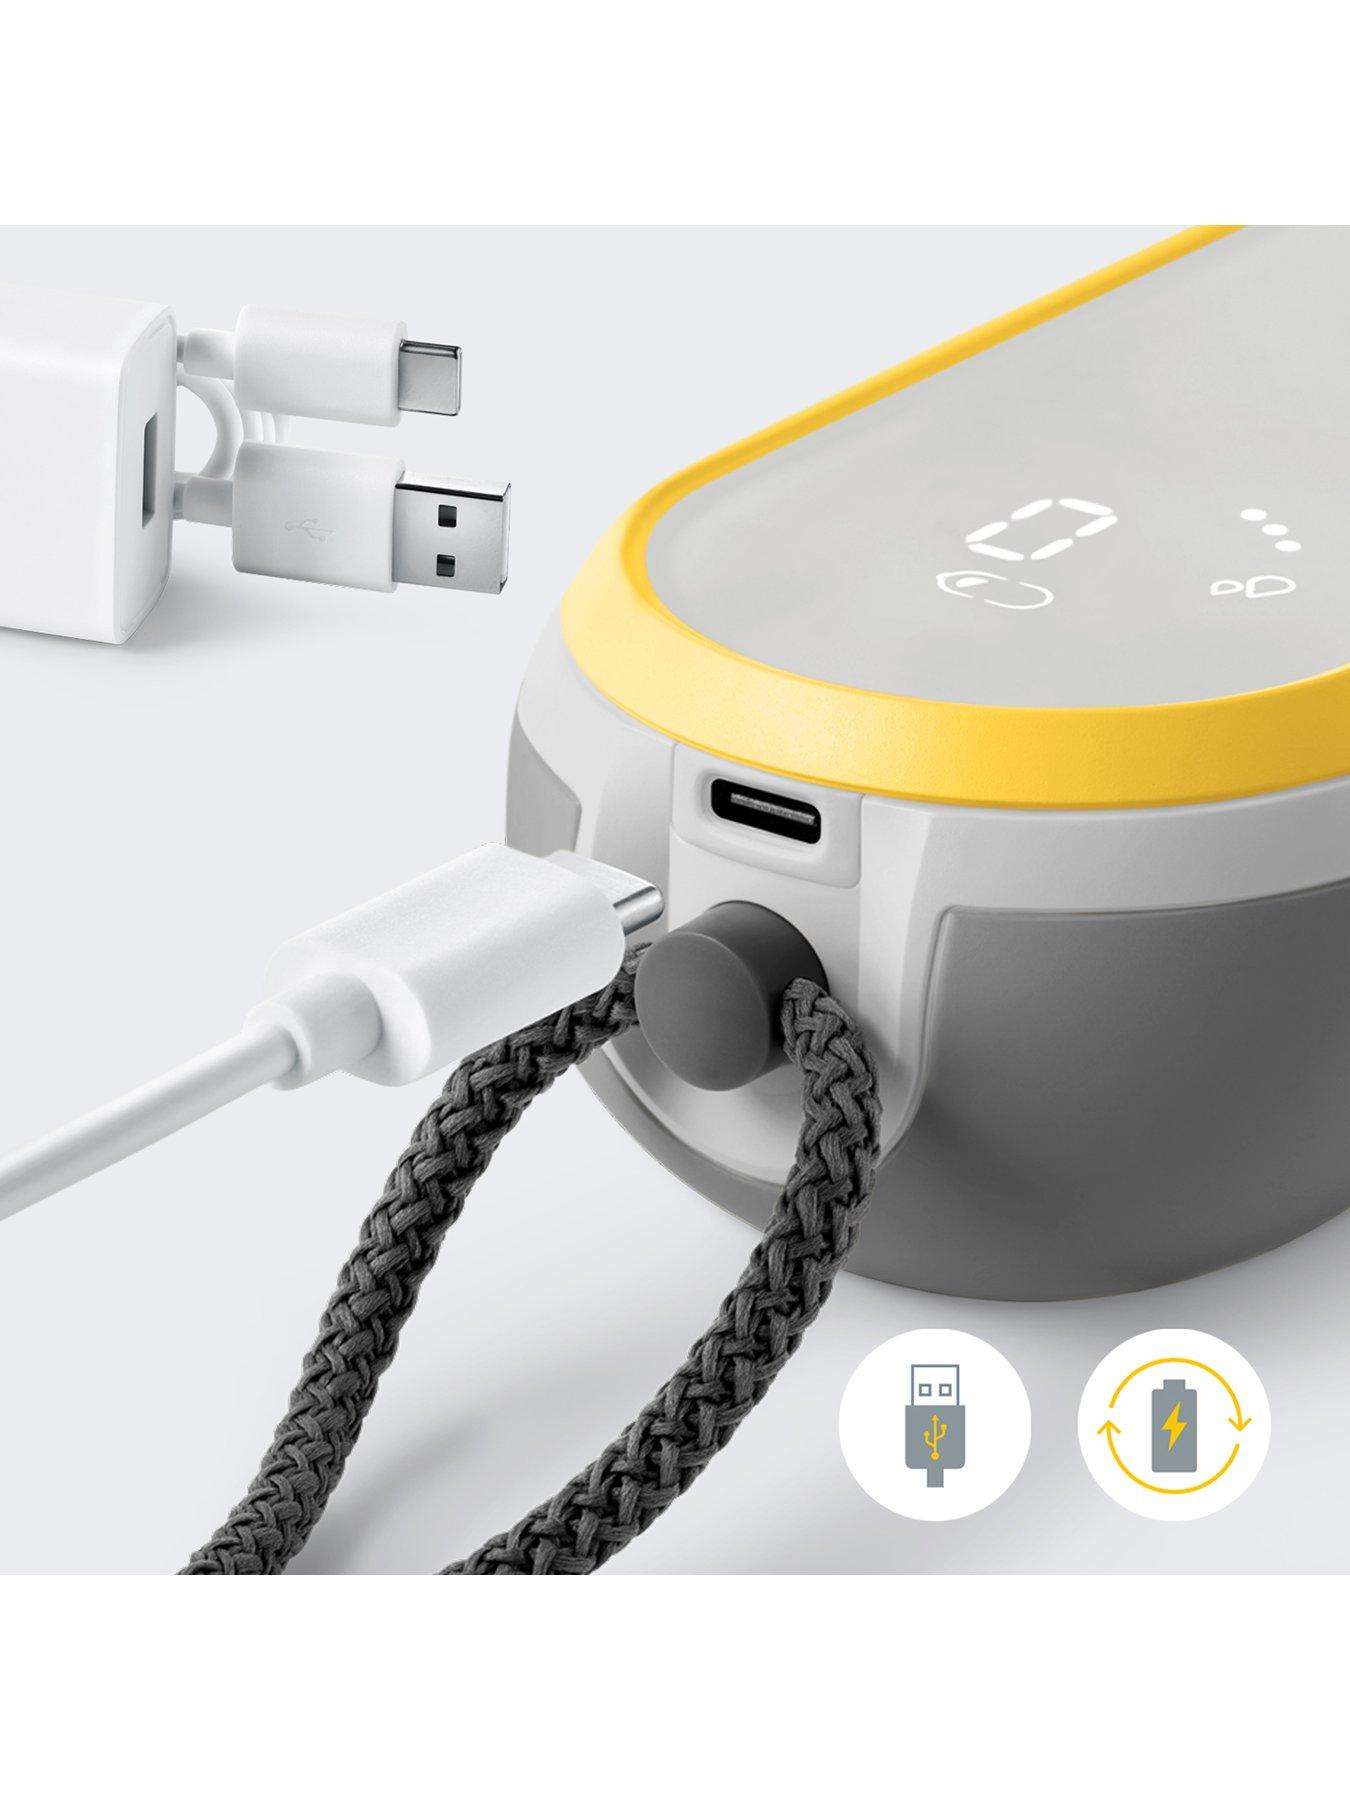 Medela Freestyle Hands-Free Breast Pump | Wearable, Portable and Discreet  Double Electric Breast Pump with App Connectivity & New Harmony Manual